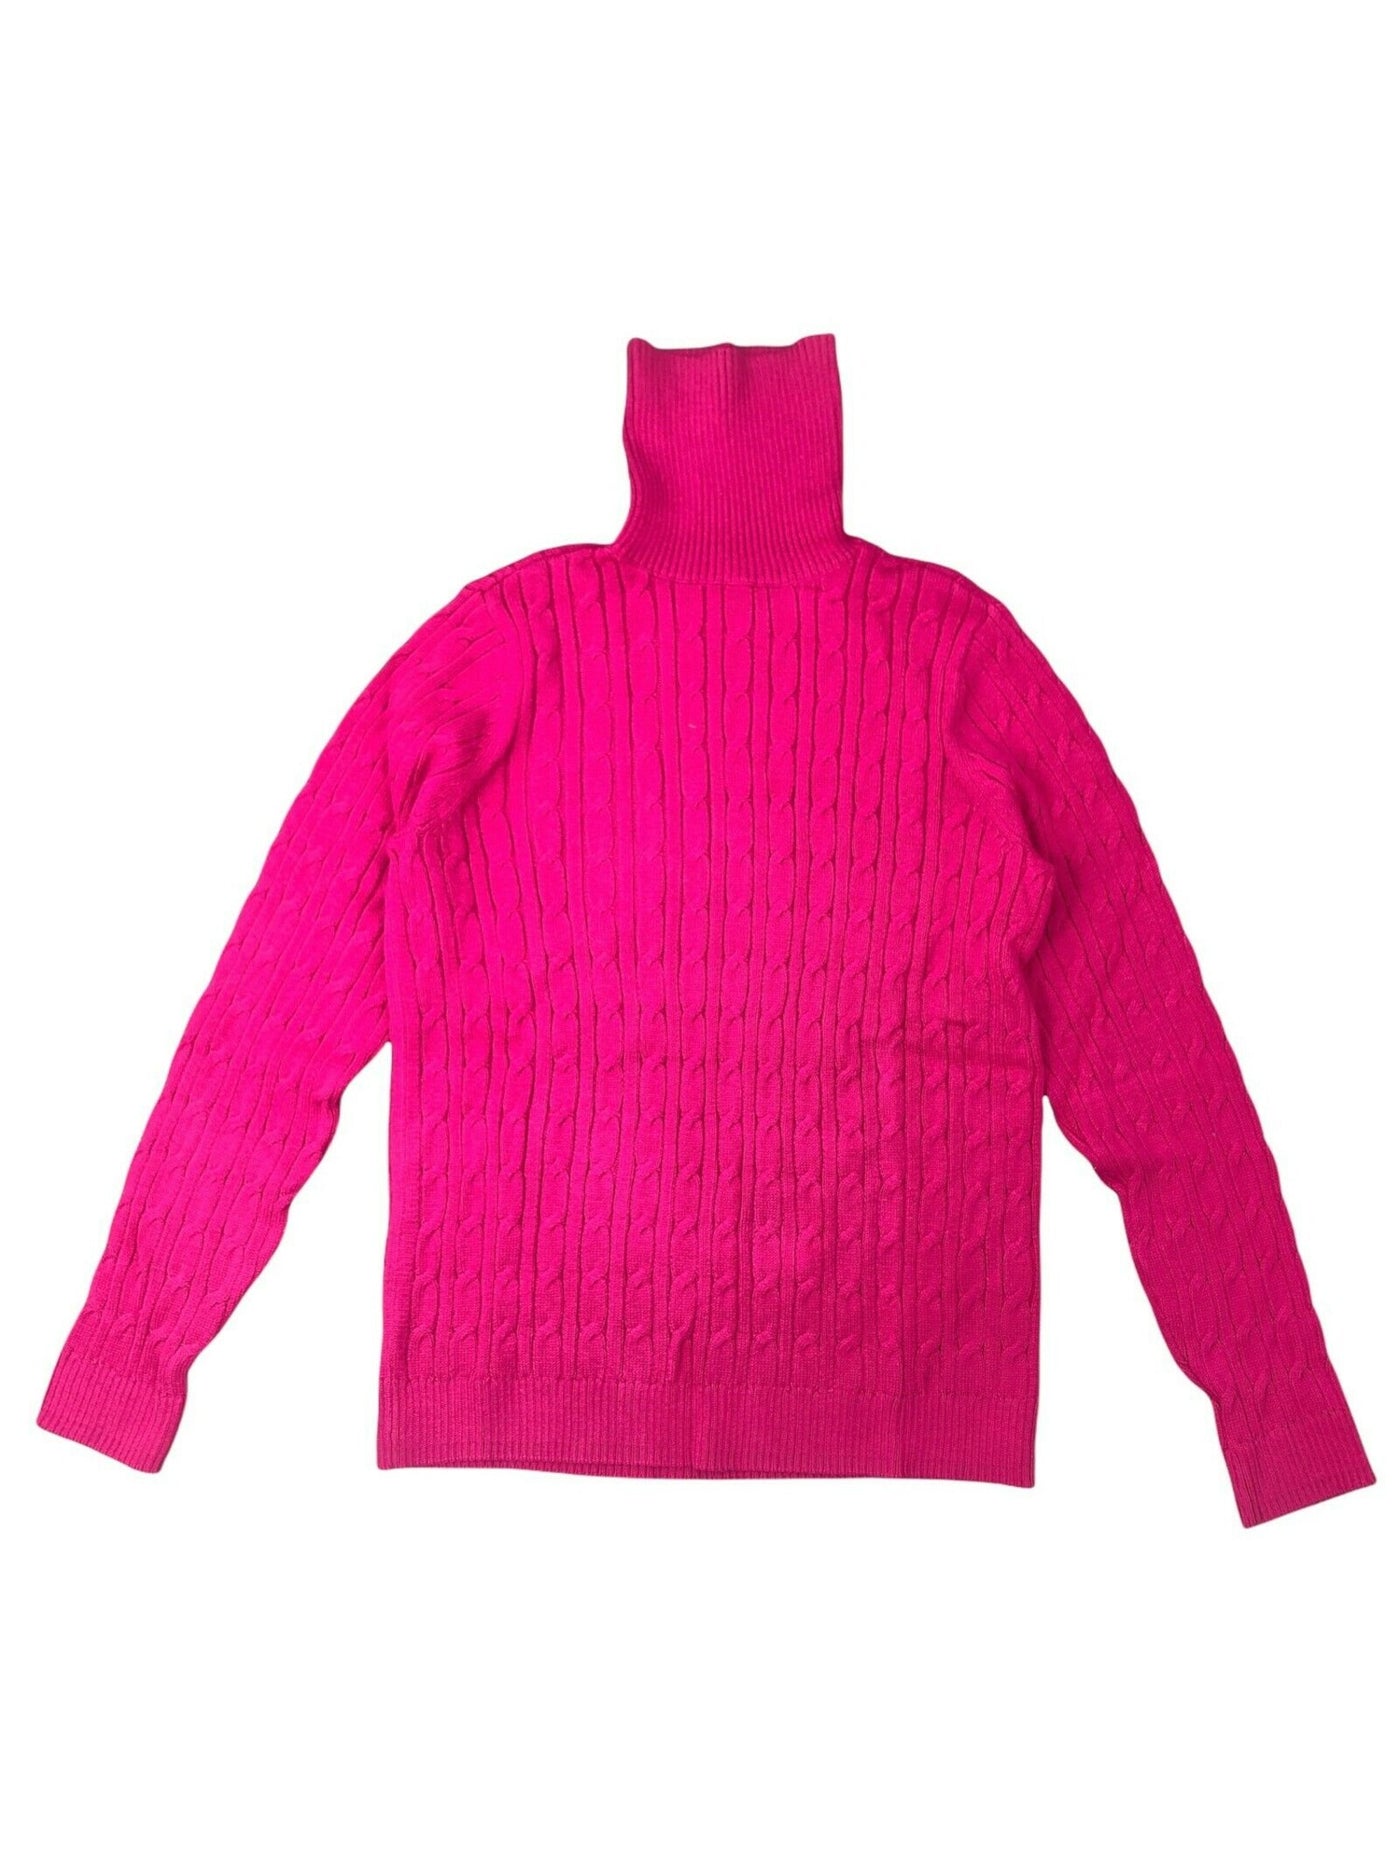 CHARTER CLUB Womens Pink Long Sleeve Turtle Neck Sweater M